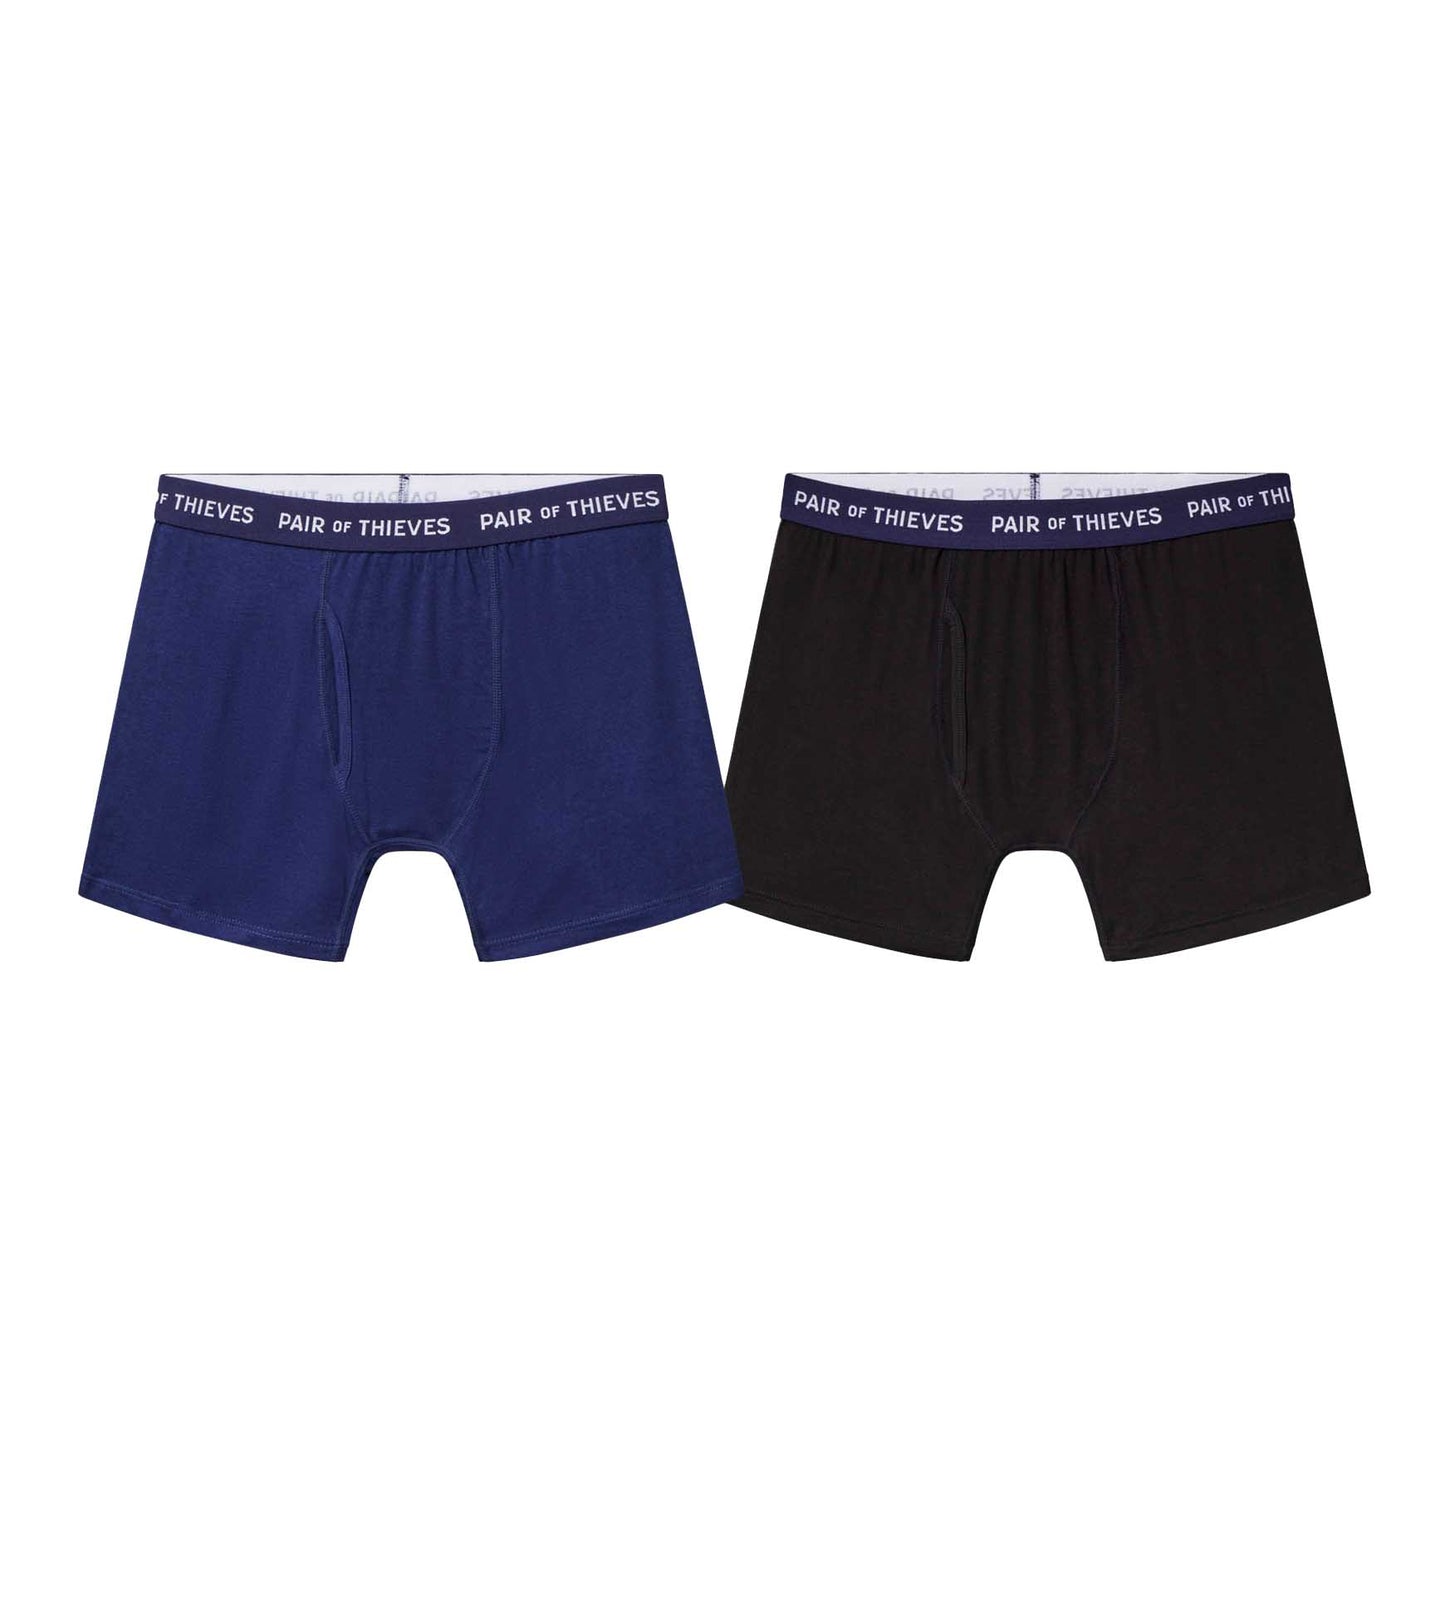 SuperSoft Boxer Briefs 2 Pack - Black/Navy - Pair of Thieves